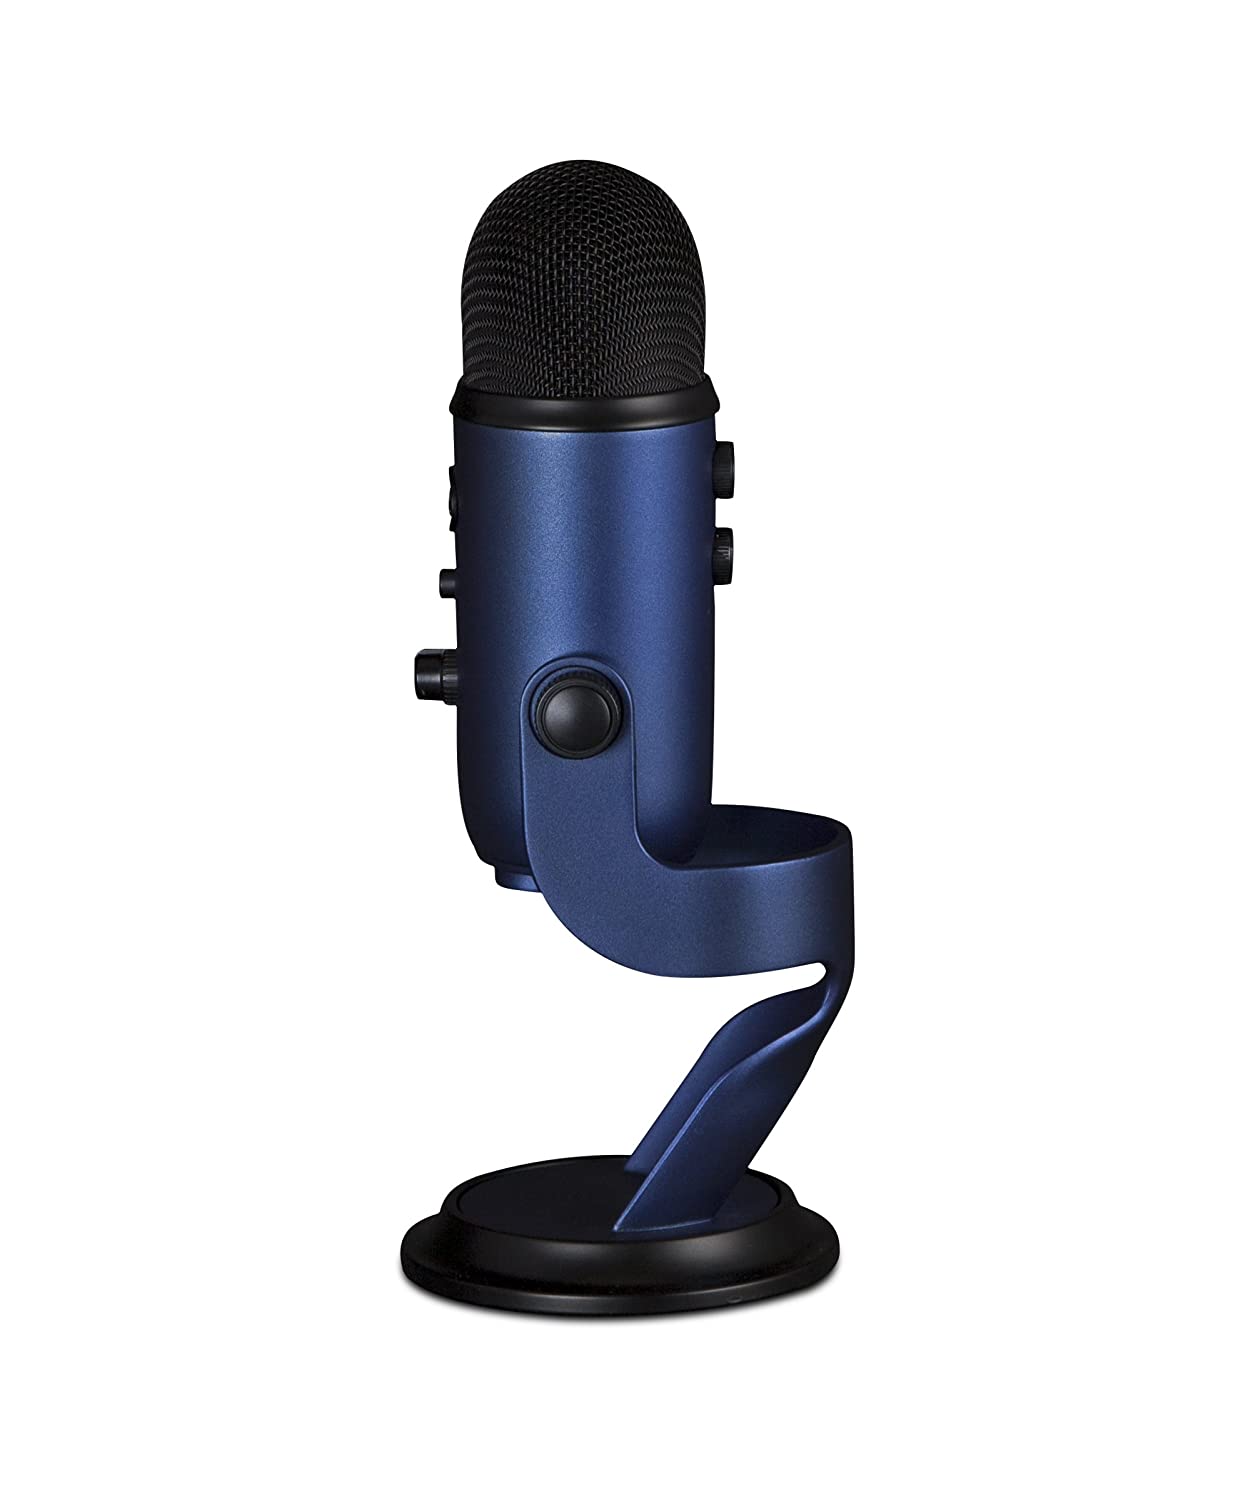 Blue Microphones Yeti USB Microphone (Blackout) Bundle with Shock Mount, Desktop Boom Arm Microphone Stand, Pop Filter for Use with Recording,並行輸入